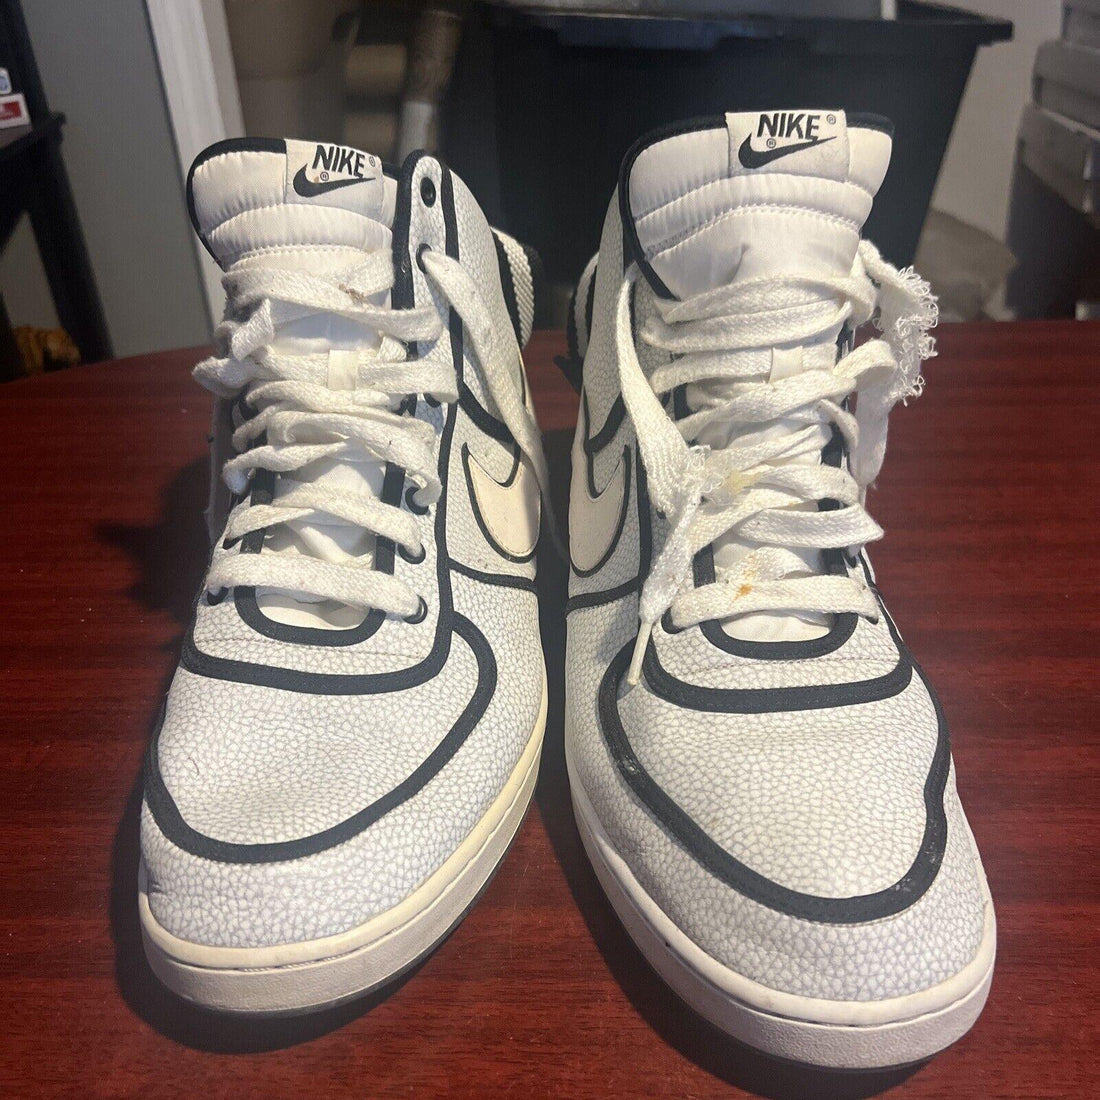 How to Clean High Tops Basketball Shoes?